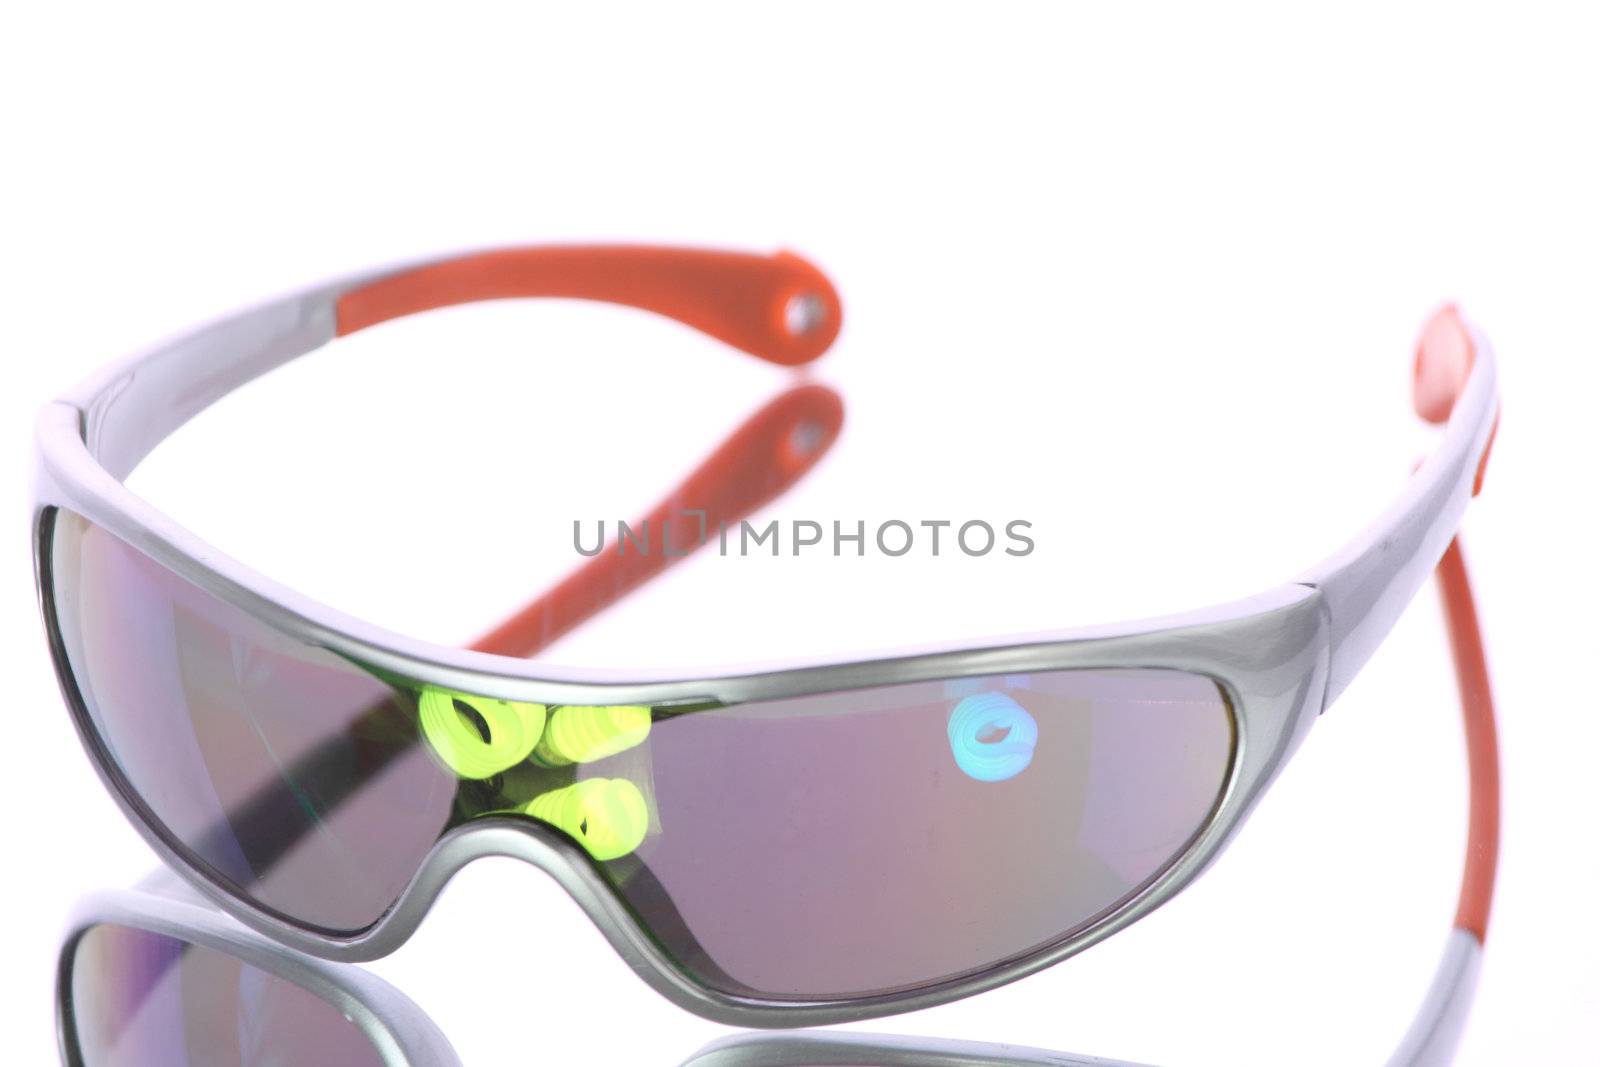 Sport sunglasses isolated on white background